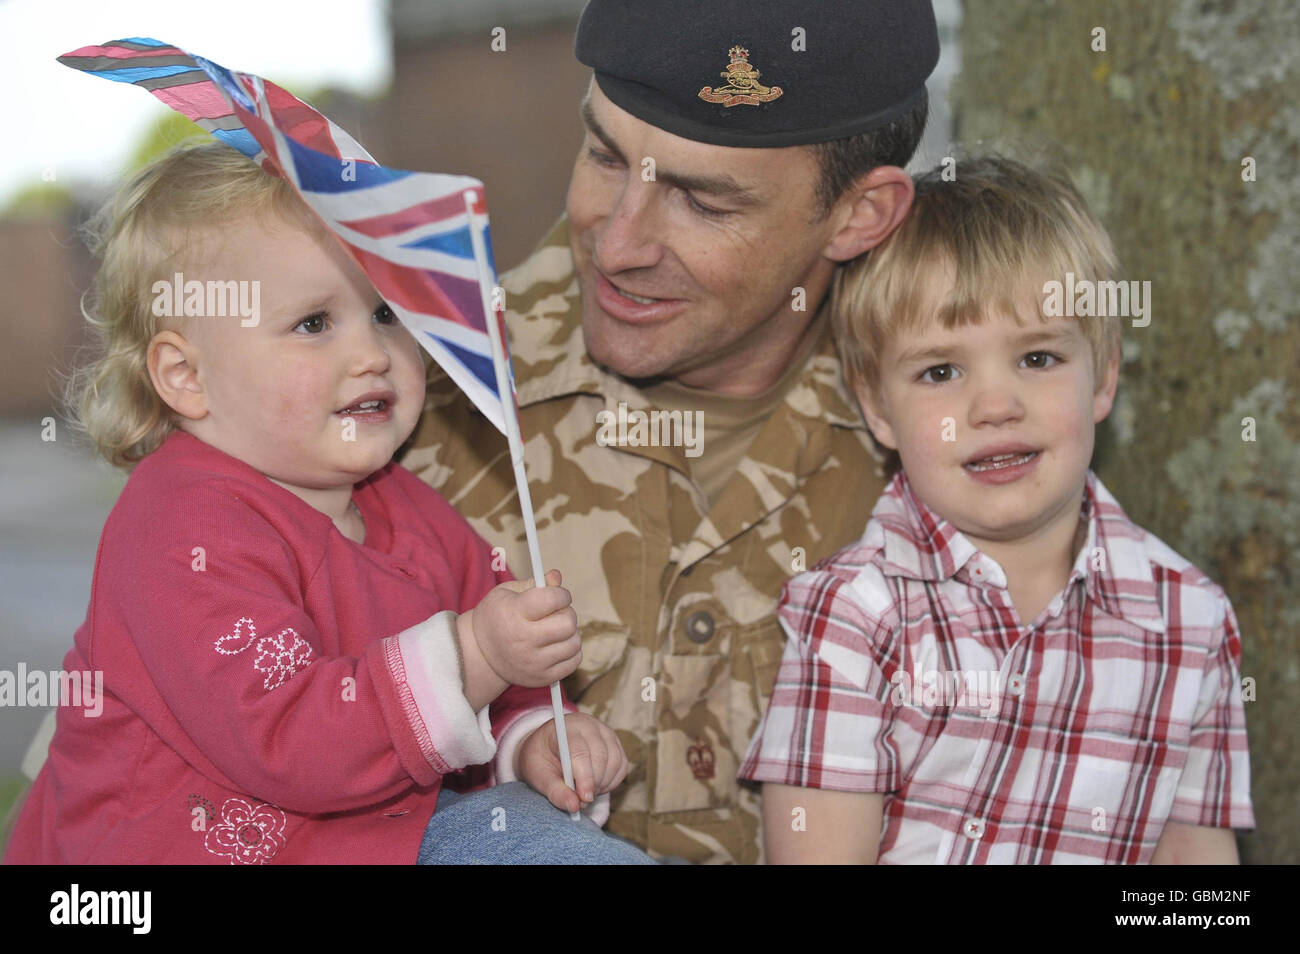 Major Nathan Webber from Larkhill, of, 32 Regiment Royal Artillery, with his children, Lucy, 2 and Sam, 4, upon his return to base at Roberts Barracks, Larkhill, Wiltshire, following their six-month deployments in both Iraq and Afghanistan. Stock Photo